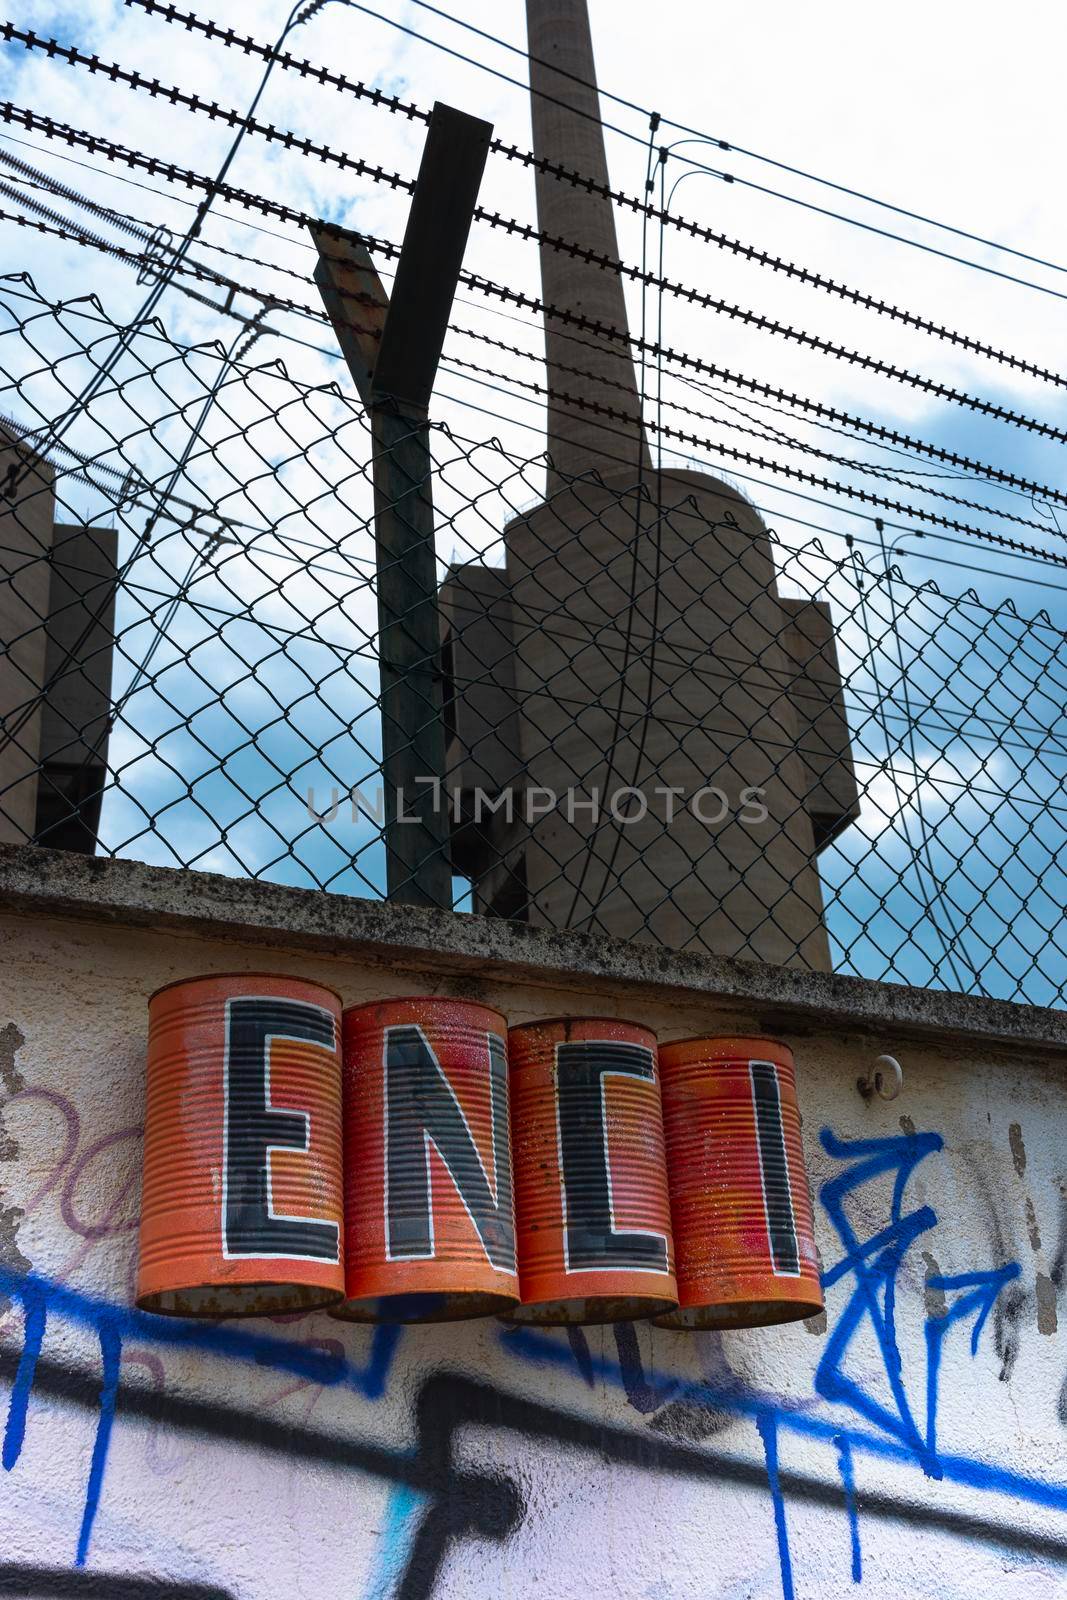 Urban art on the wall of an old disused thermal power plant for the production of electricity in Barcelona behind a metal fence